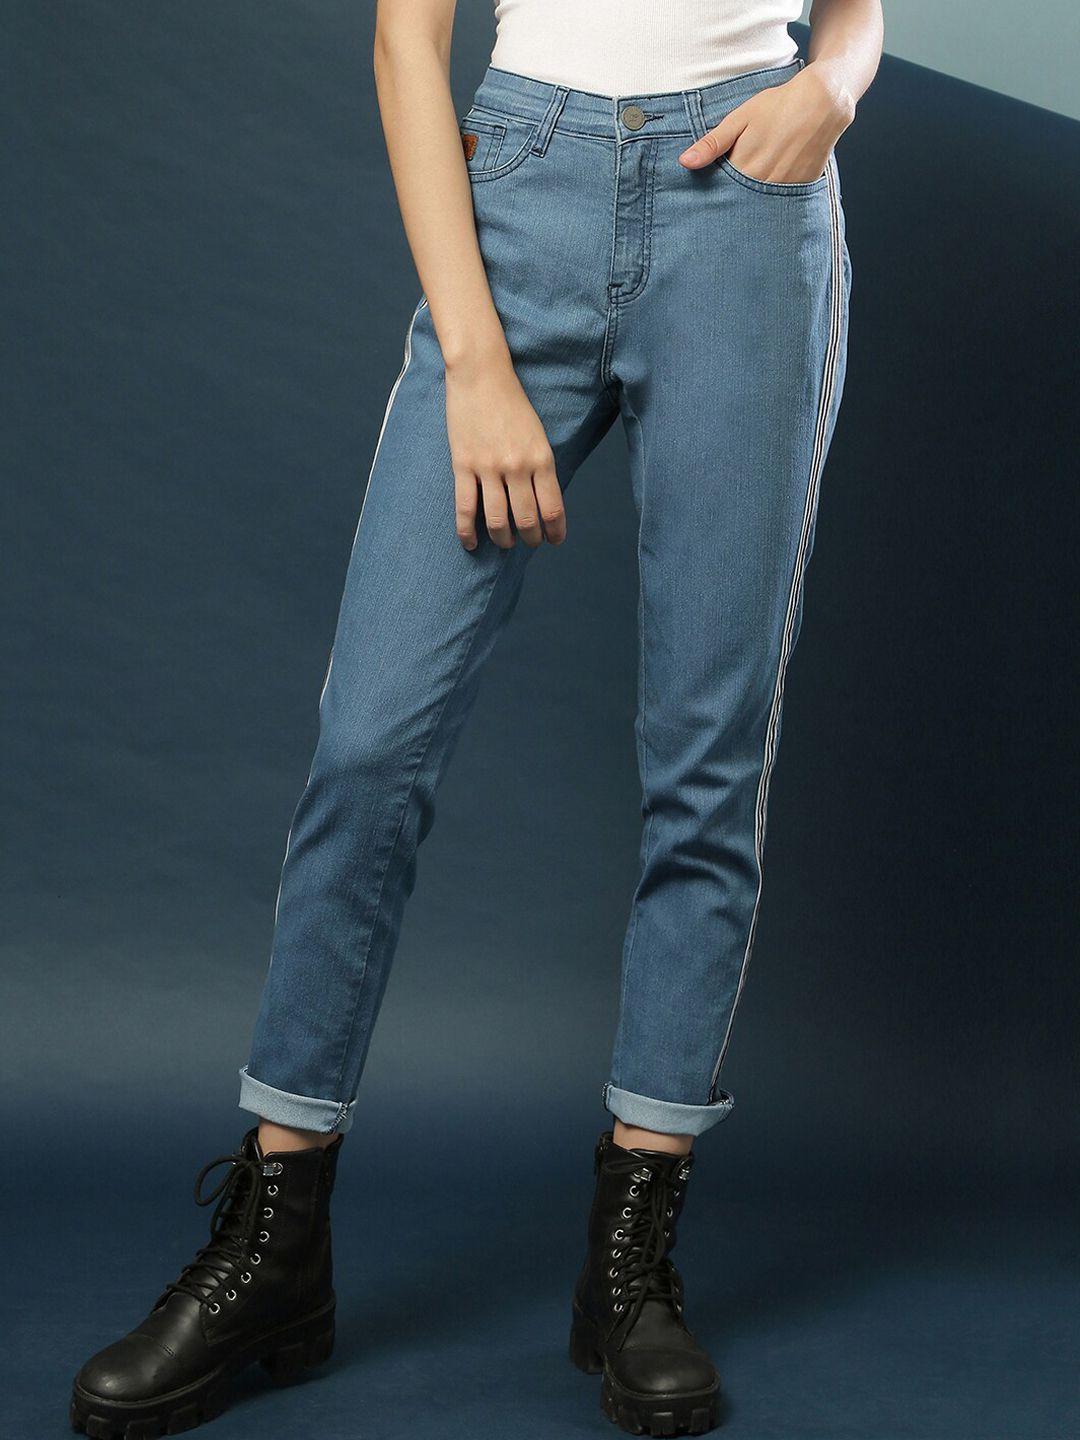 campus sutra women navy blue slim fit light fade jeans